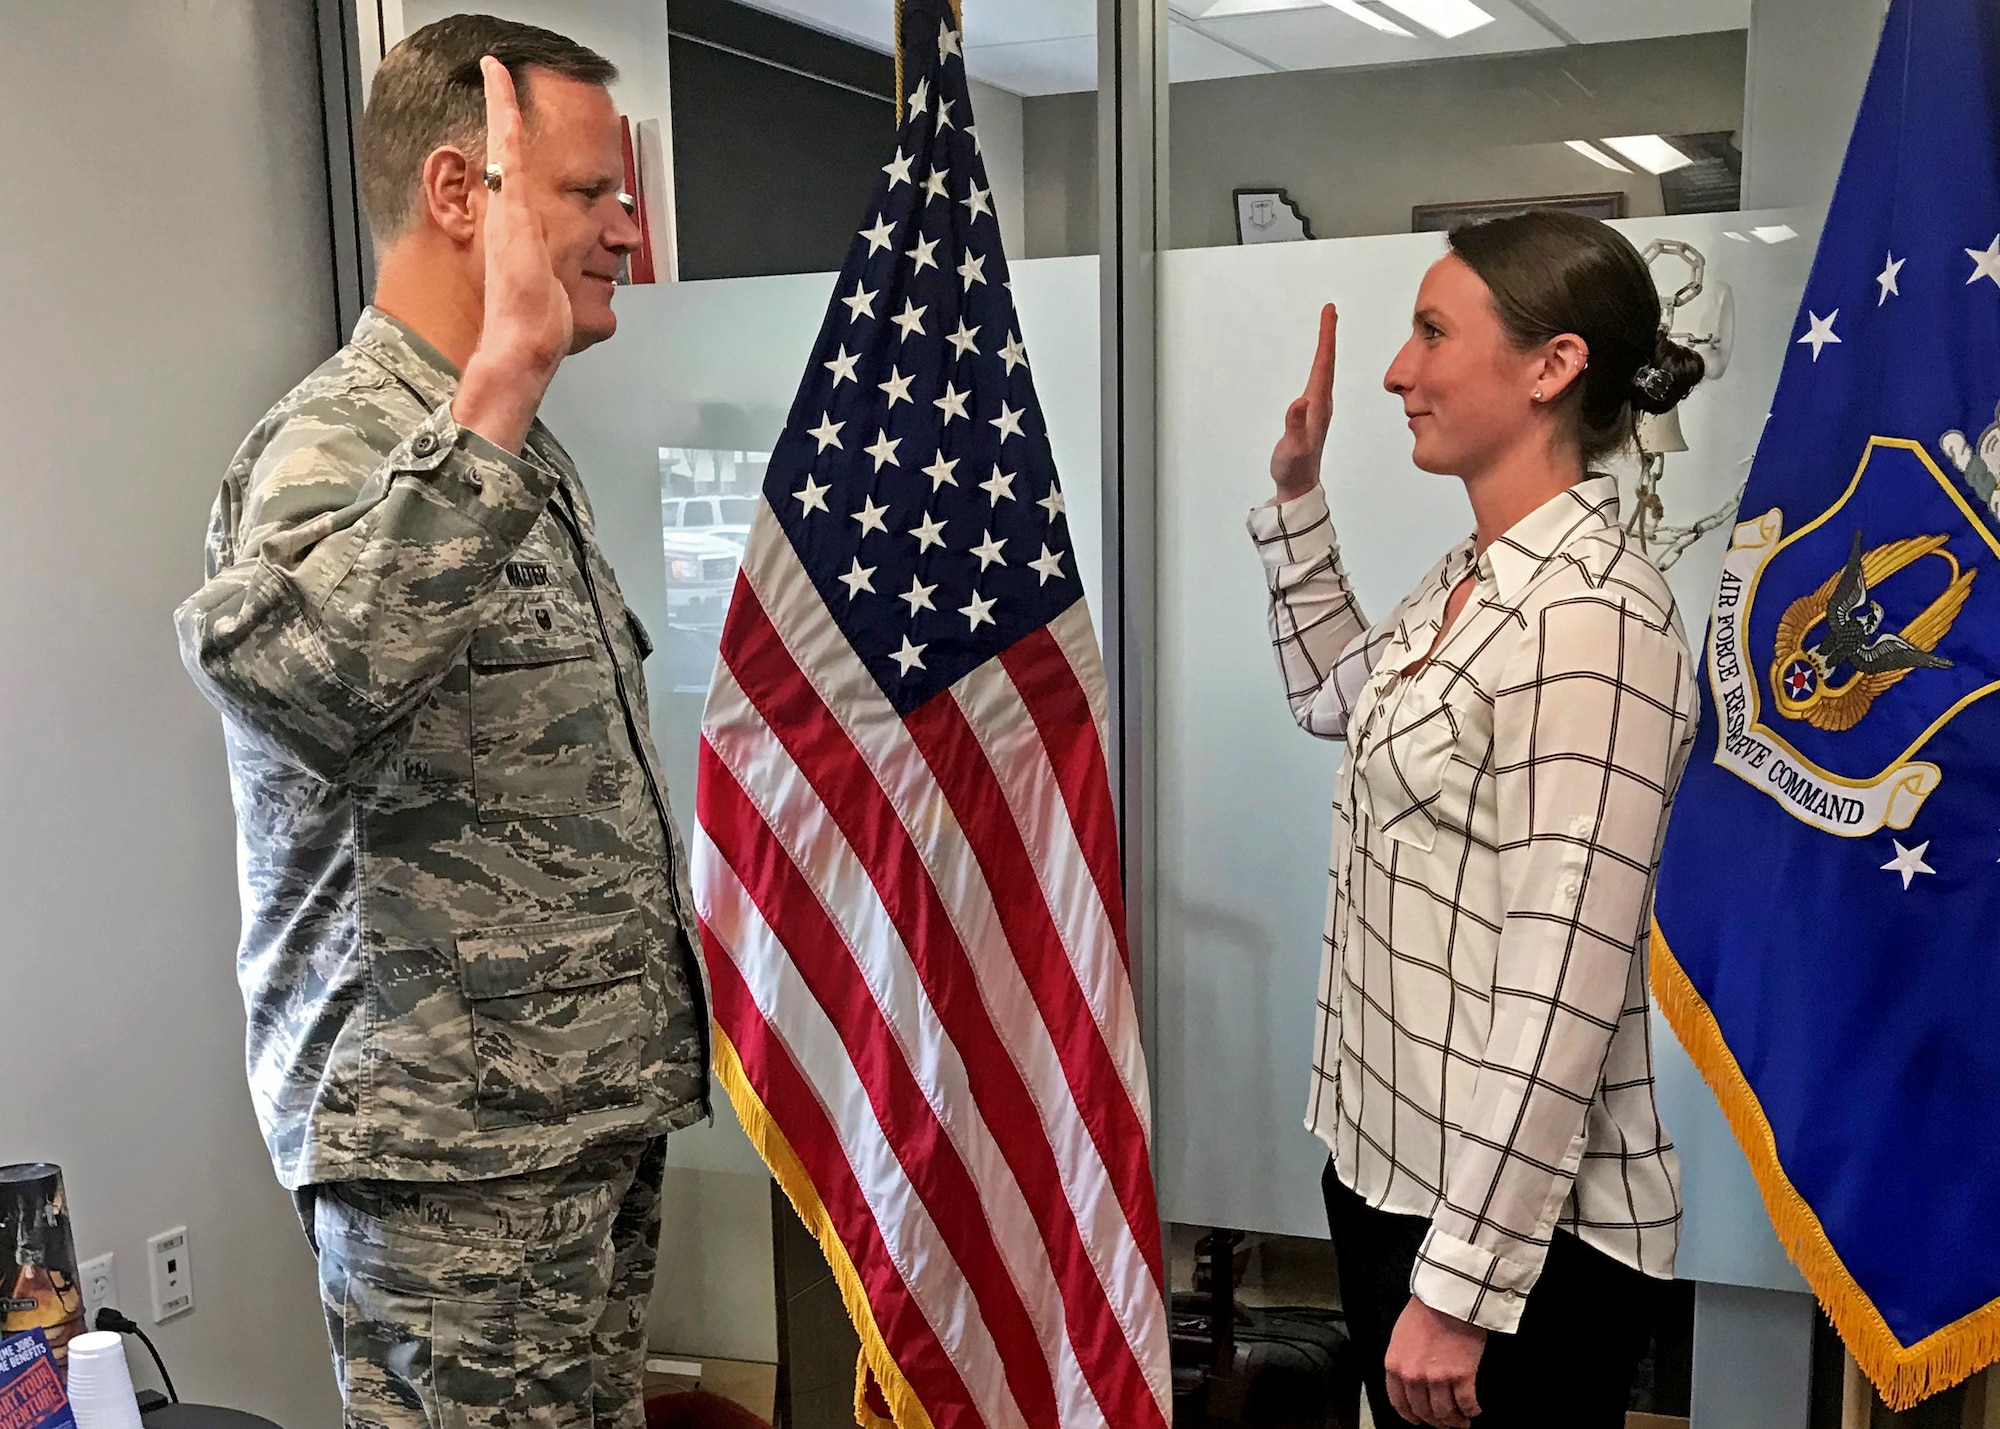 Lt. Col. Joseph Walter, wing process manager for the 442d Fighter Wing, administers the oath of enlistment to soon-to-be 2nd Lt. Margaret “Maggie” Ann Atkins at Whiteman Air Force Base, May 21, 2018.